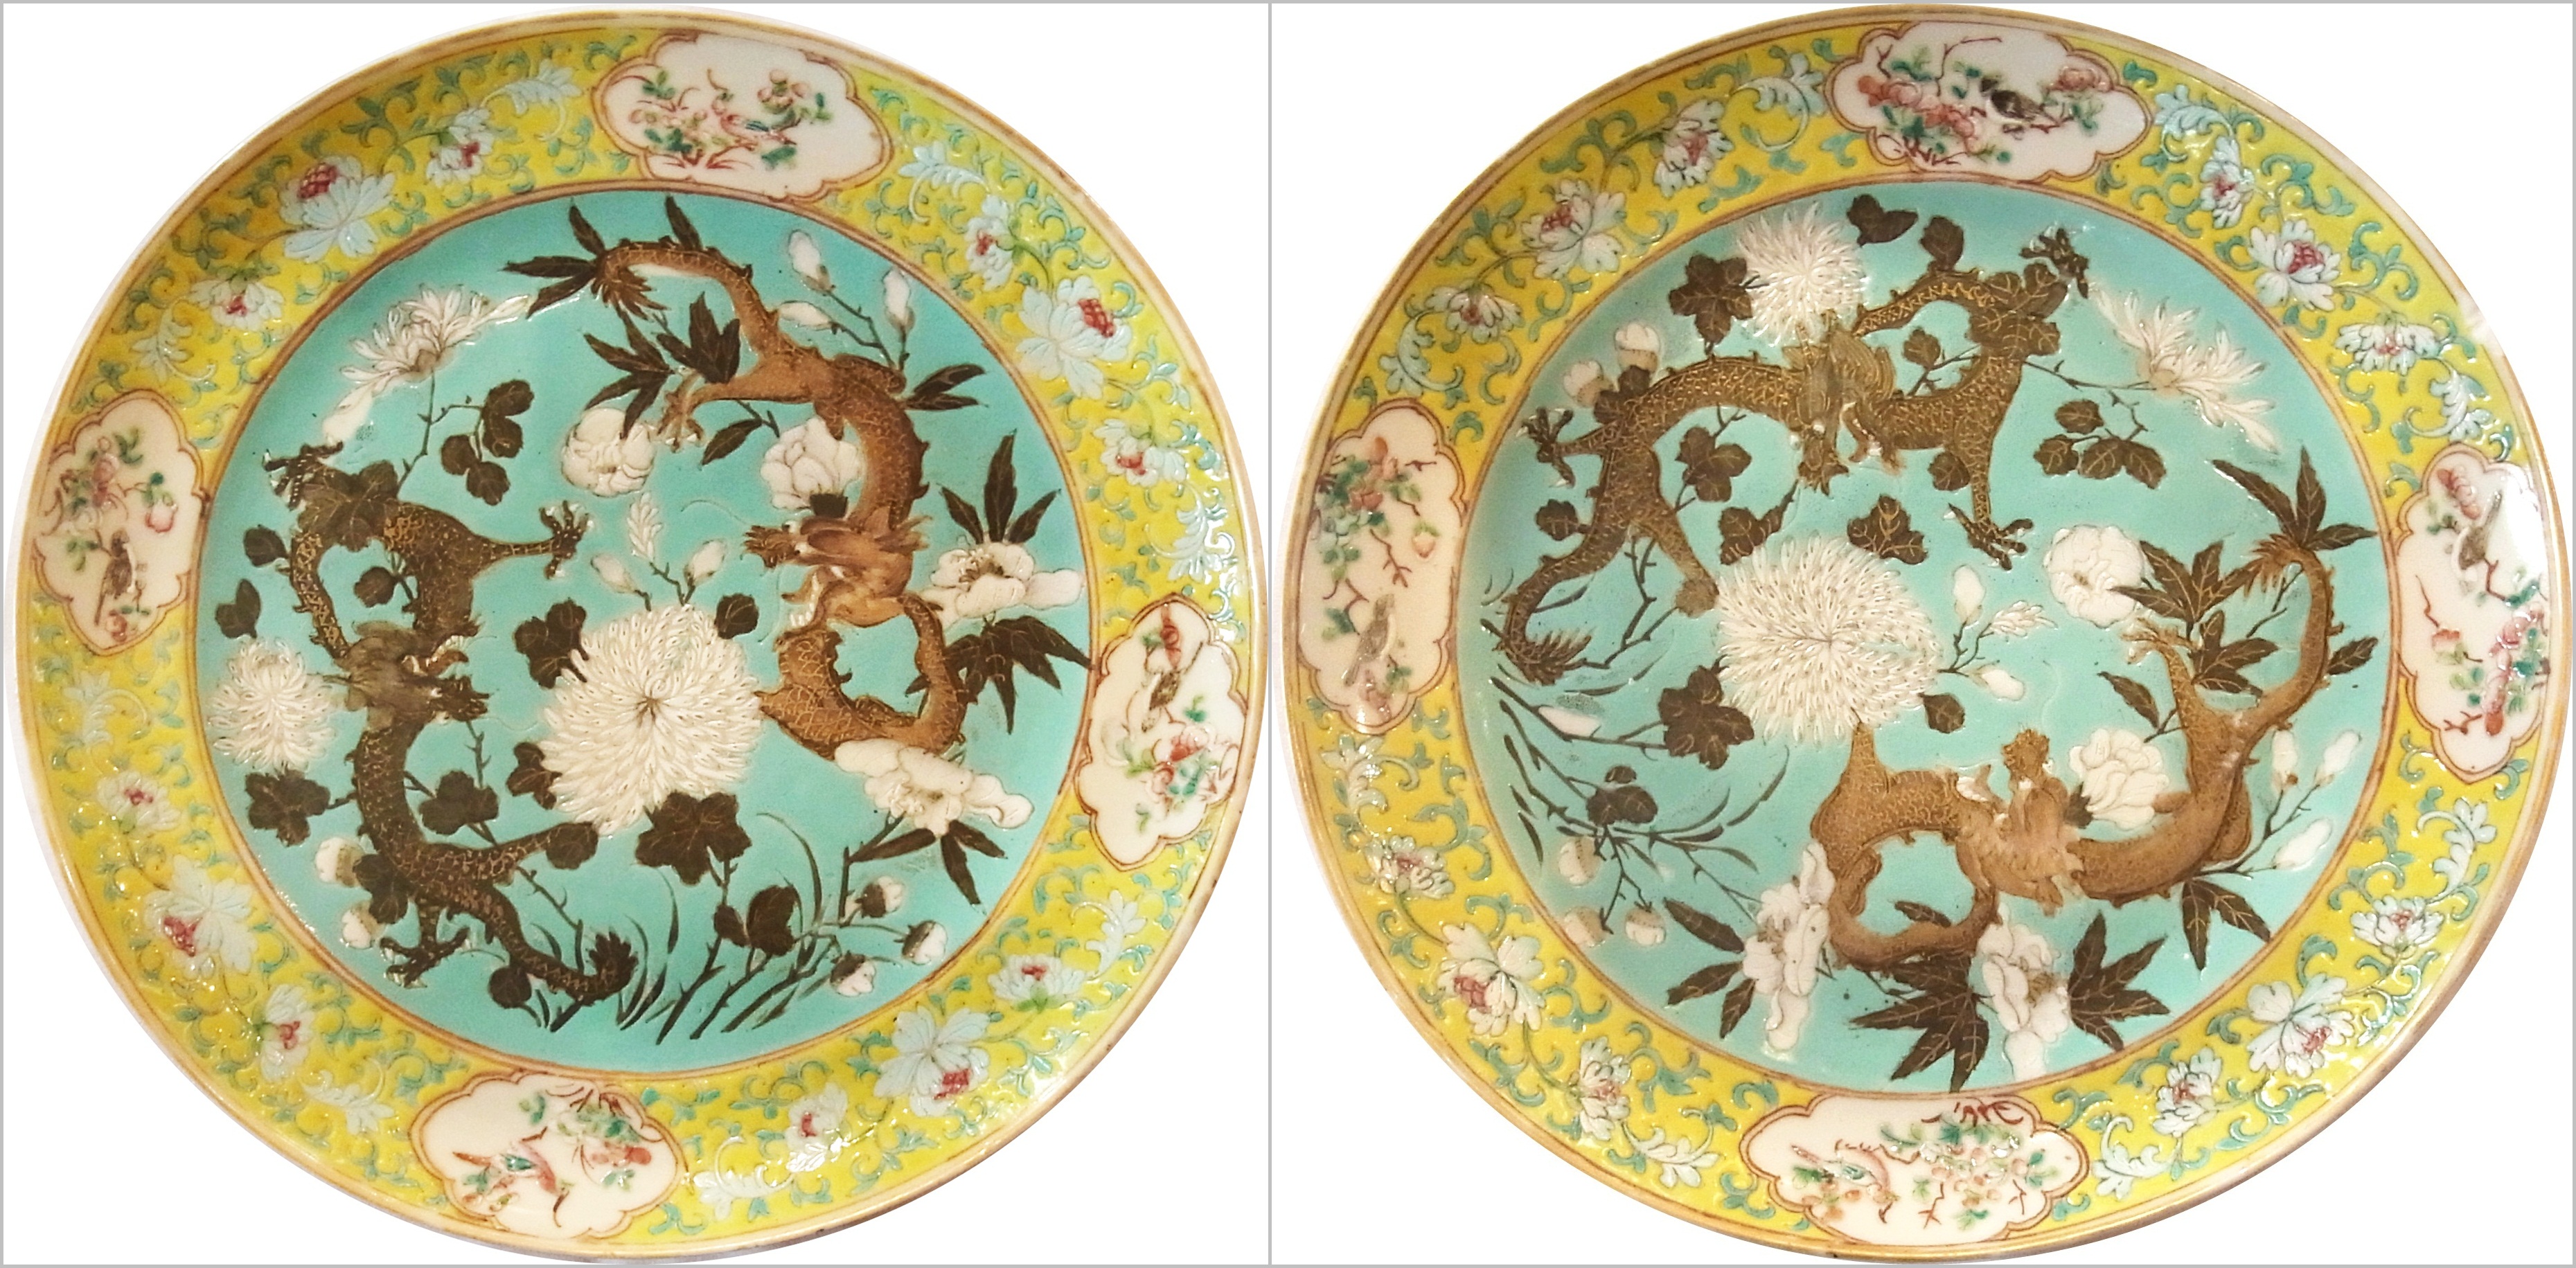 Pair of late 19th century Chinese porcelain plates, the yellow enamelled border with floral scroll